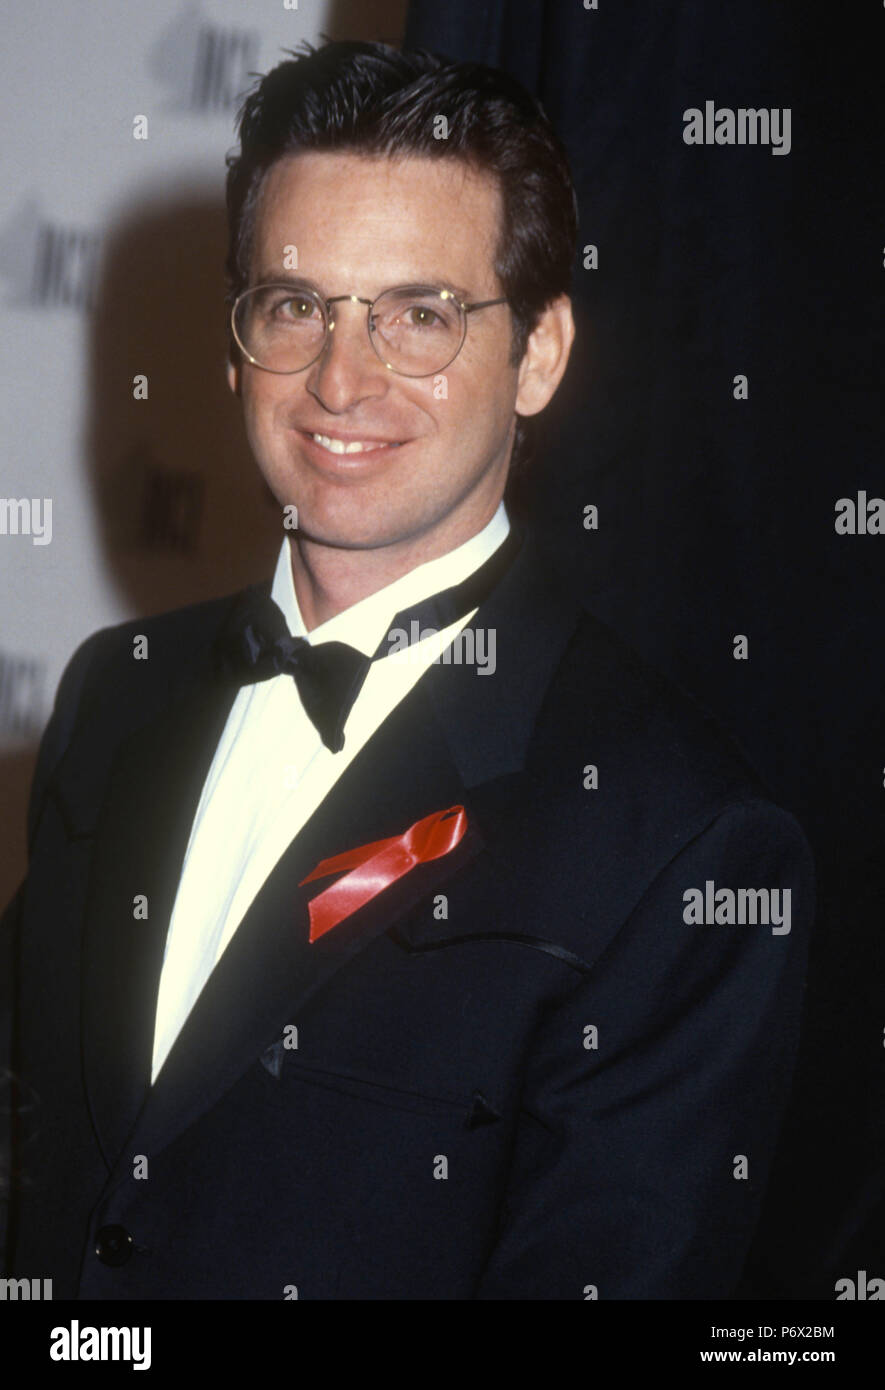 HOLLYWOOD, CA - JANUARY 12:  Actor Robert Carradine attends the 13th Annual National CableACE Awards on January 12, 1992 at the Pantages Theatre in Hollywood, California. Photo by Barry King/Alamy Stock Photo Stock Photo